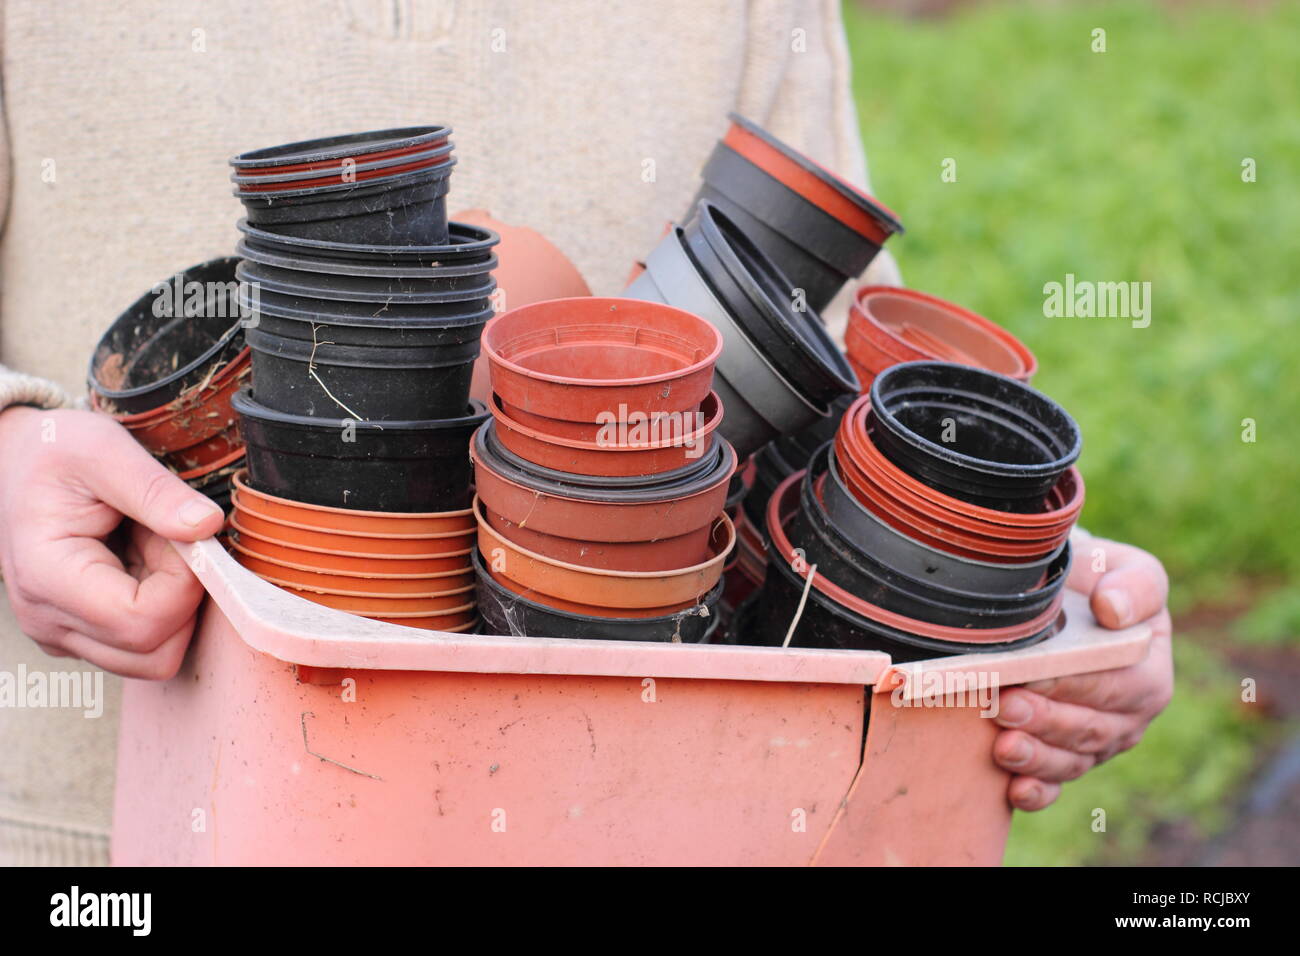 Gardener with empty black and red plastic plants pots in a plastic bowl, UK garden. Plastic free gardening Stock Photo